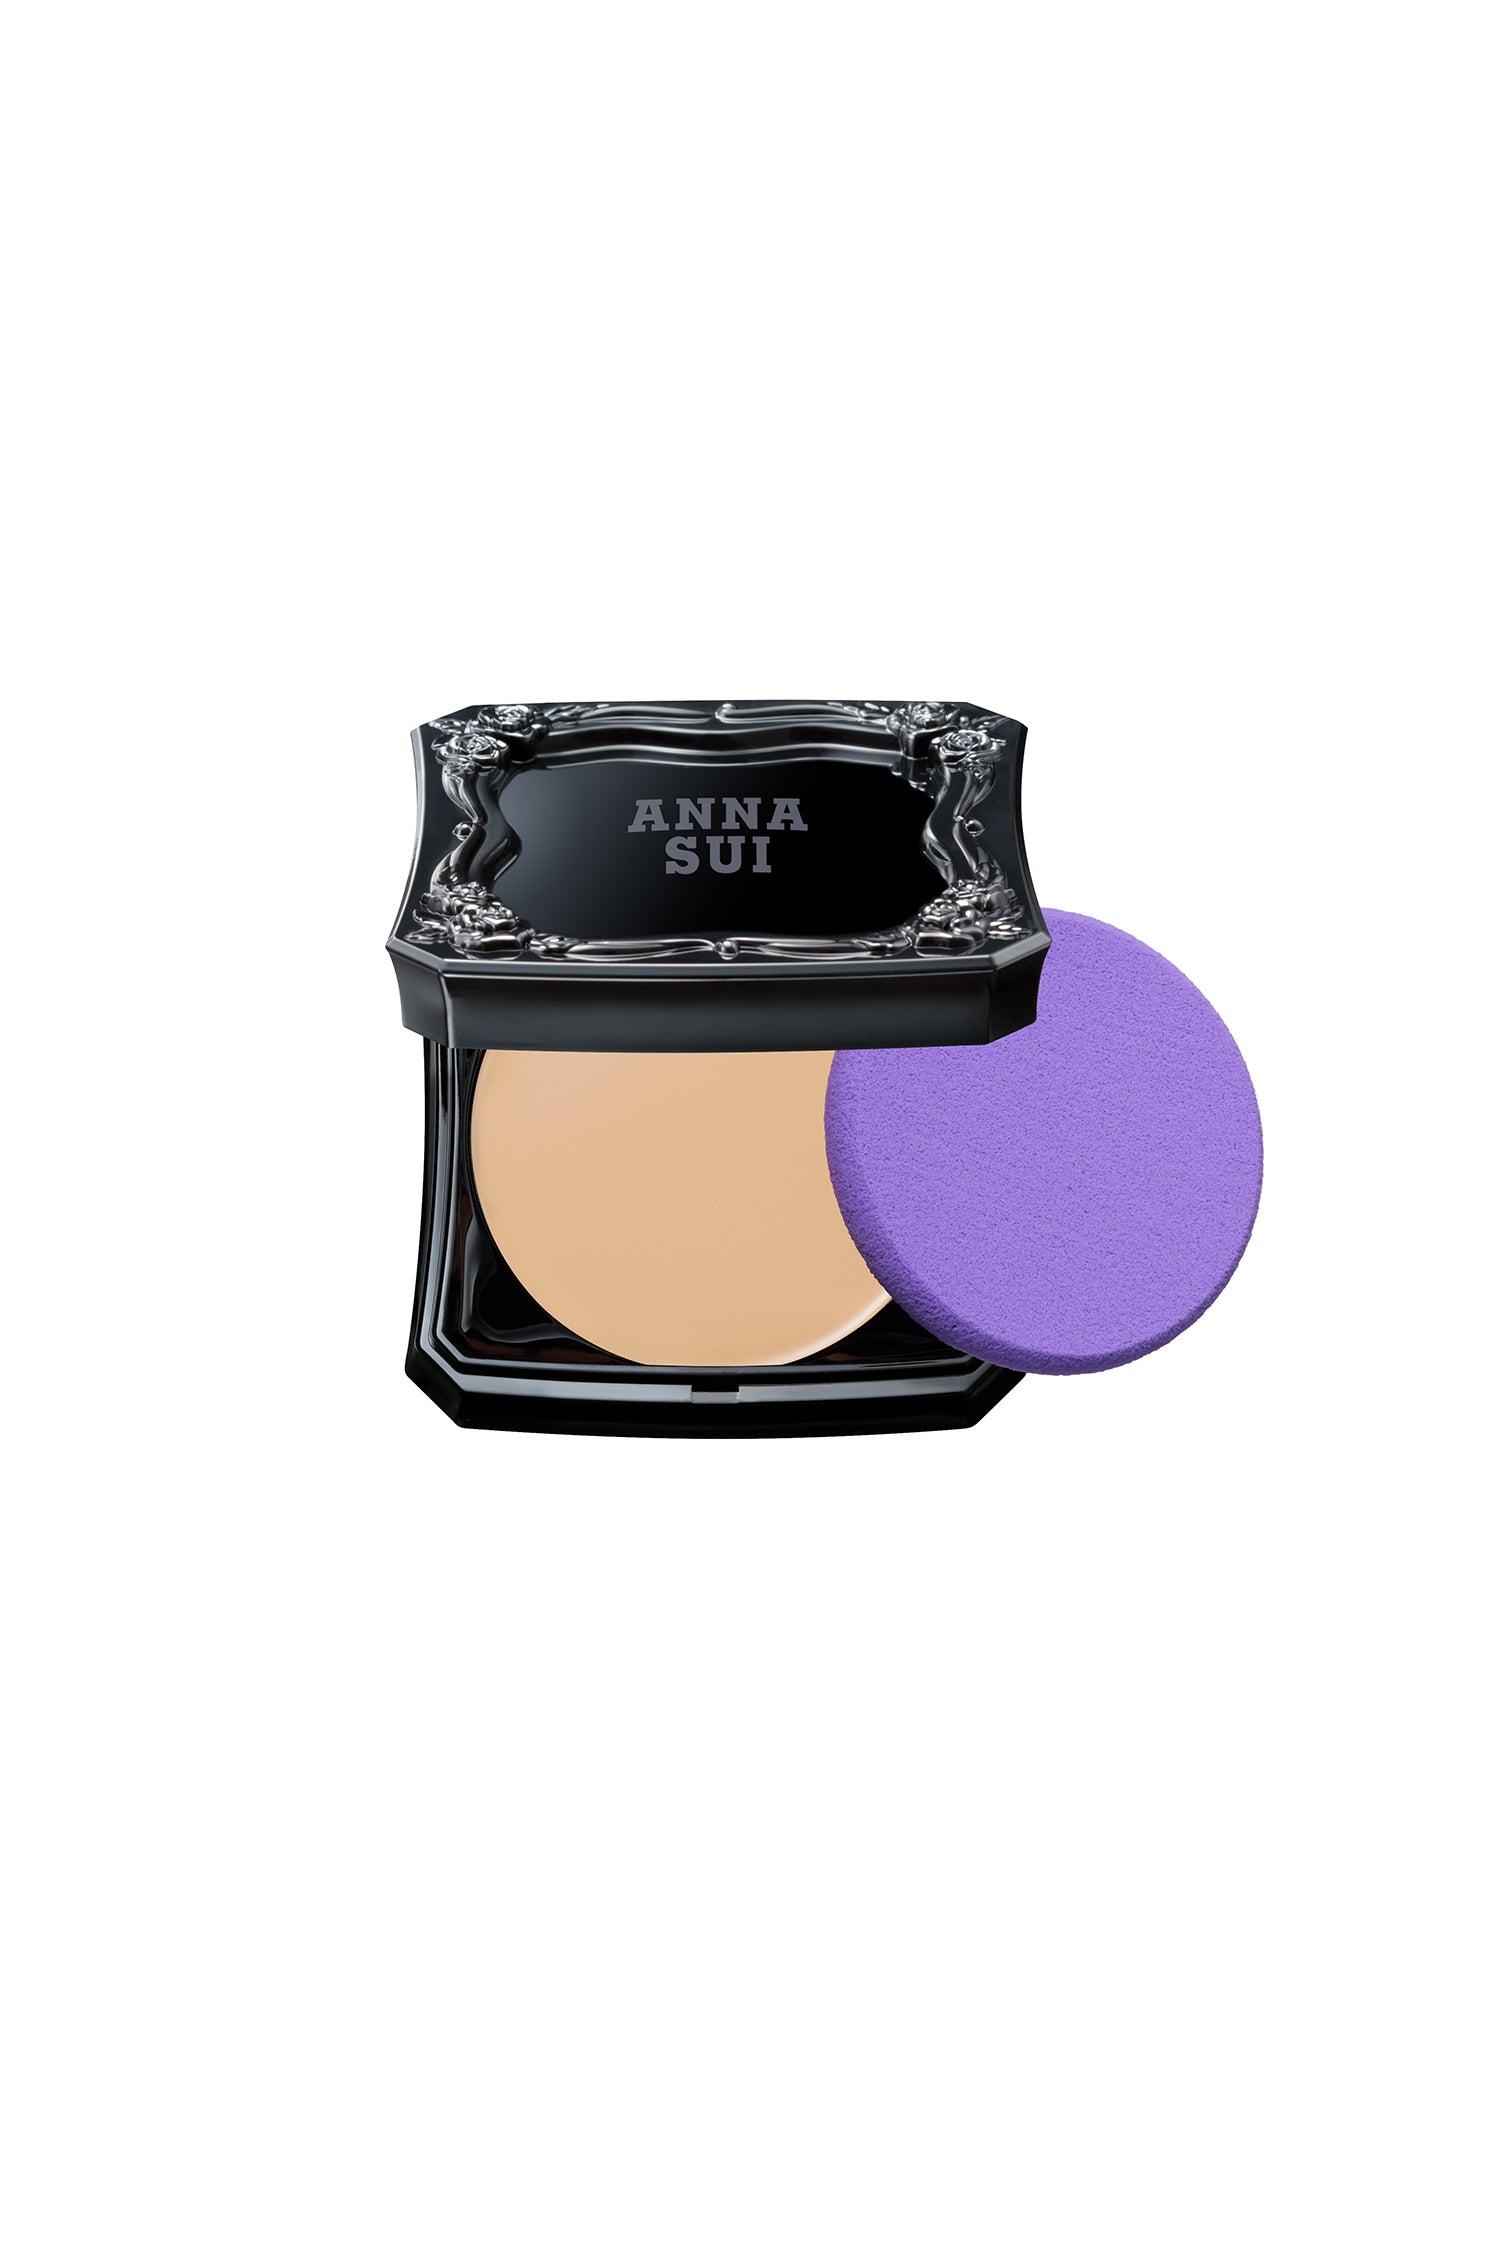 Anna Sui LIGHT foundation in a black container with raised rose pattern and label, creates a flawless doll-like look